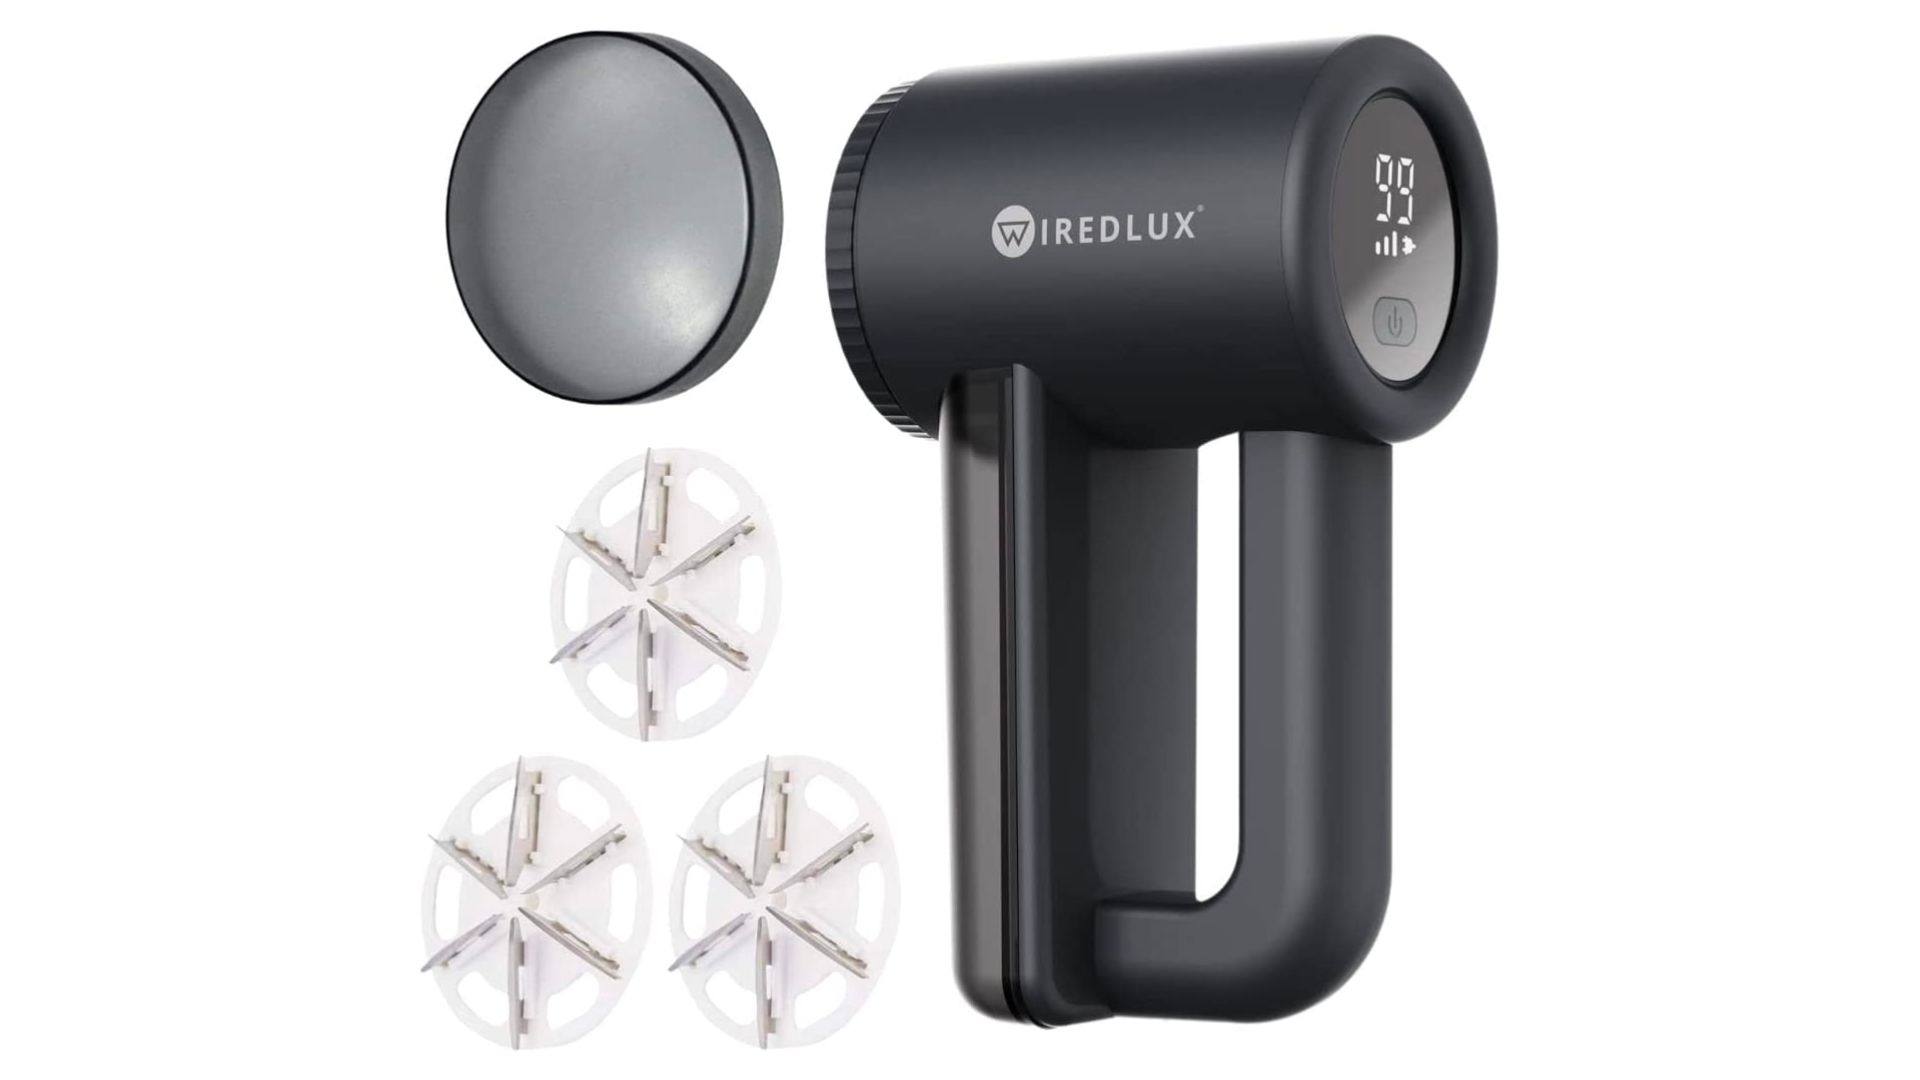 Wiredlux fabric remover and lint shaver